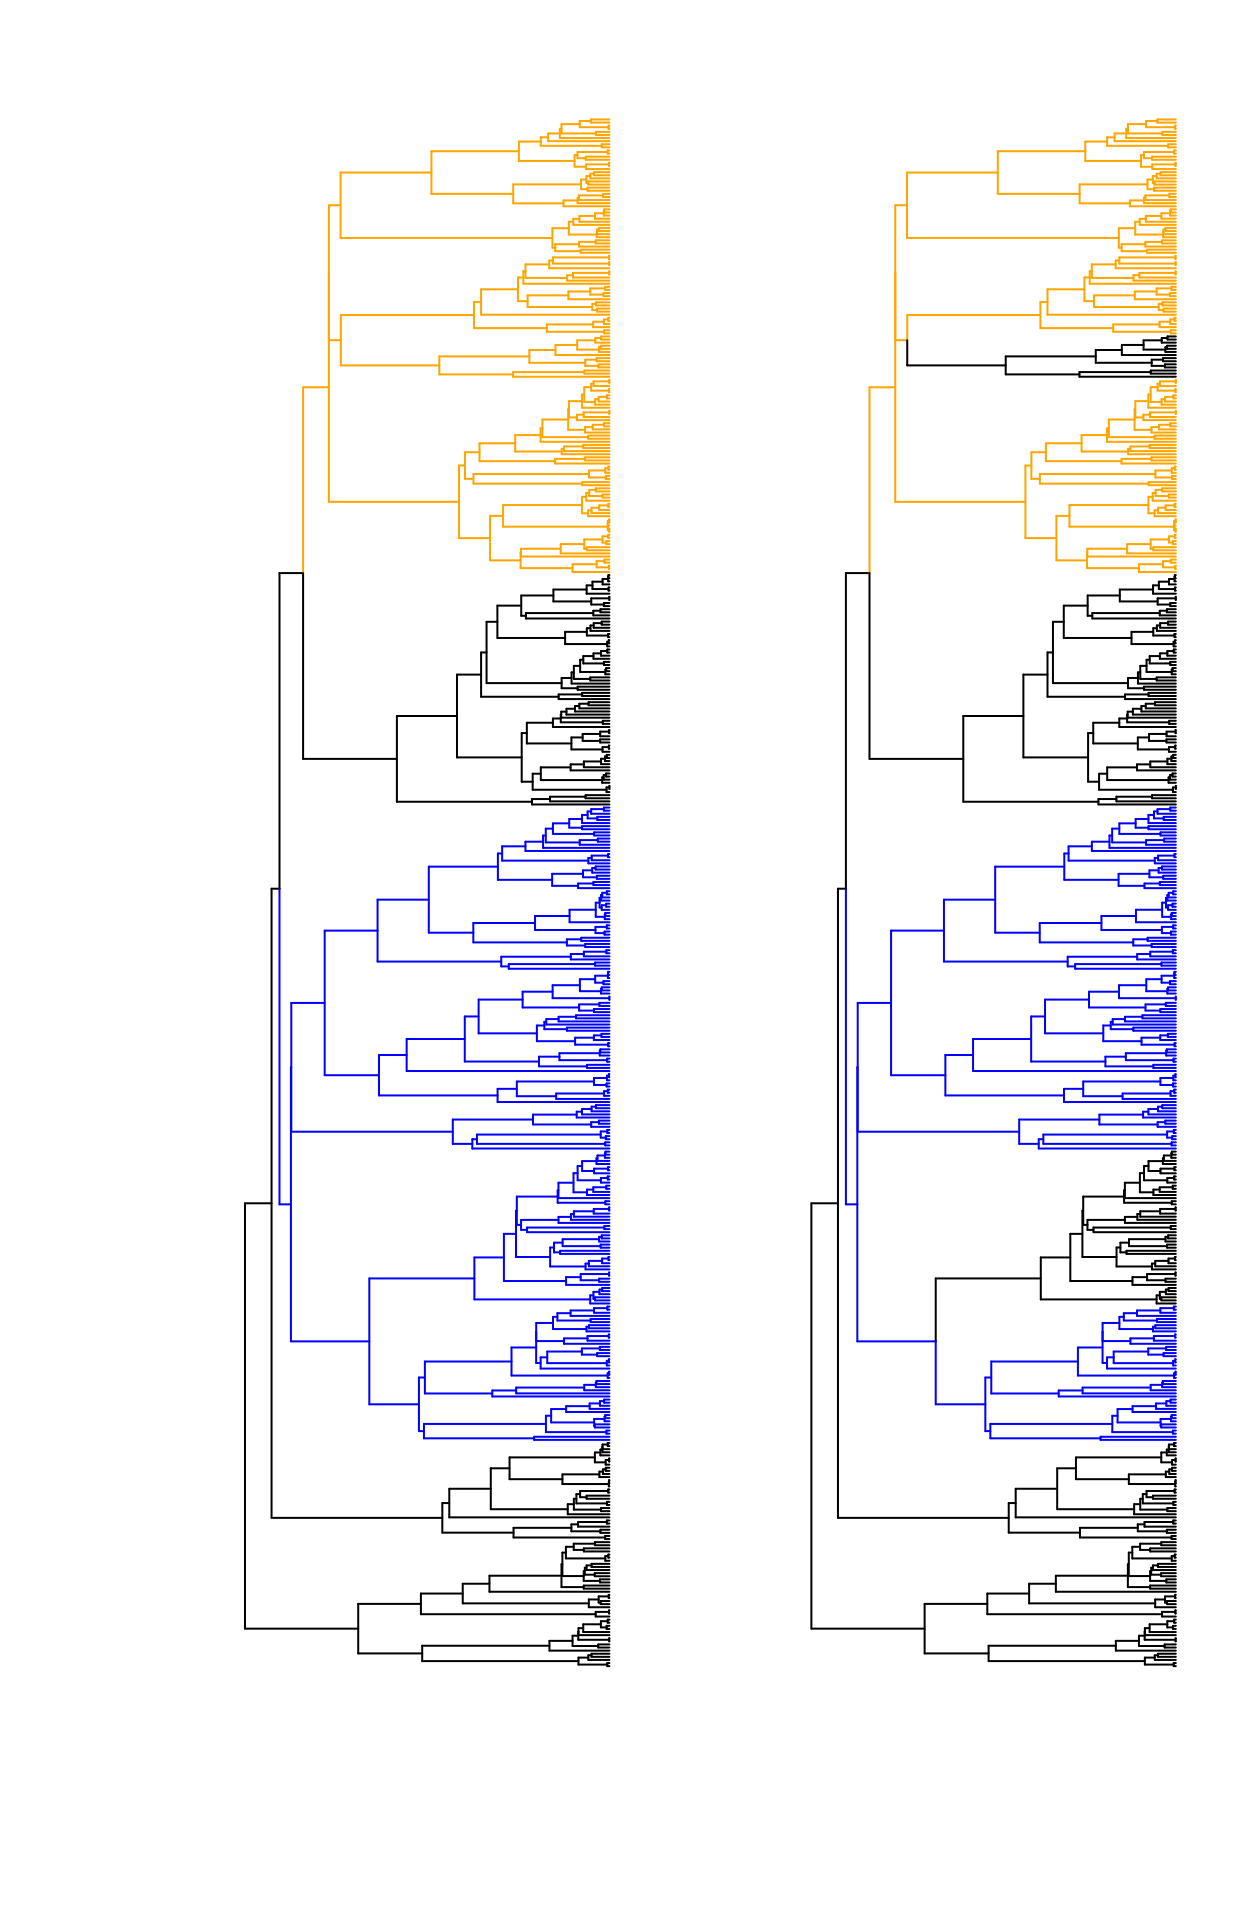 The edges are painted by regime, assuming an optimum $\theta_i$ for each color. As shown in Ho and Ane (2014a) the left shows an case of unidentifiability case because every regime forms a connected component. The tree on the right shows a case of identifiability because the black regime covers two completely disconnected parts in the tree.